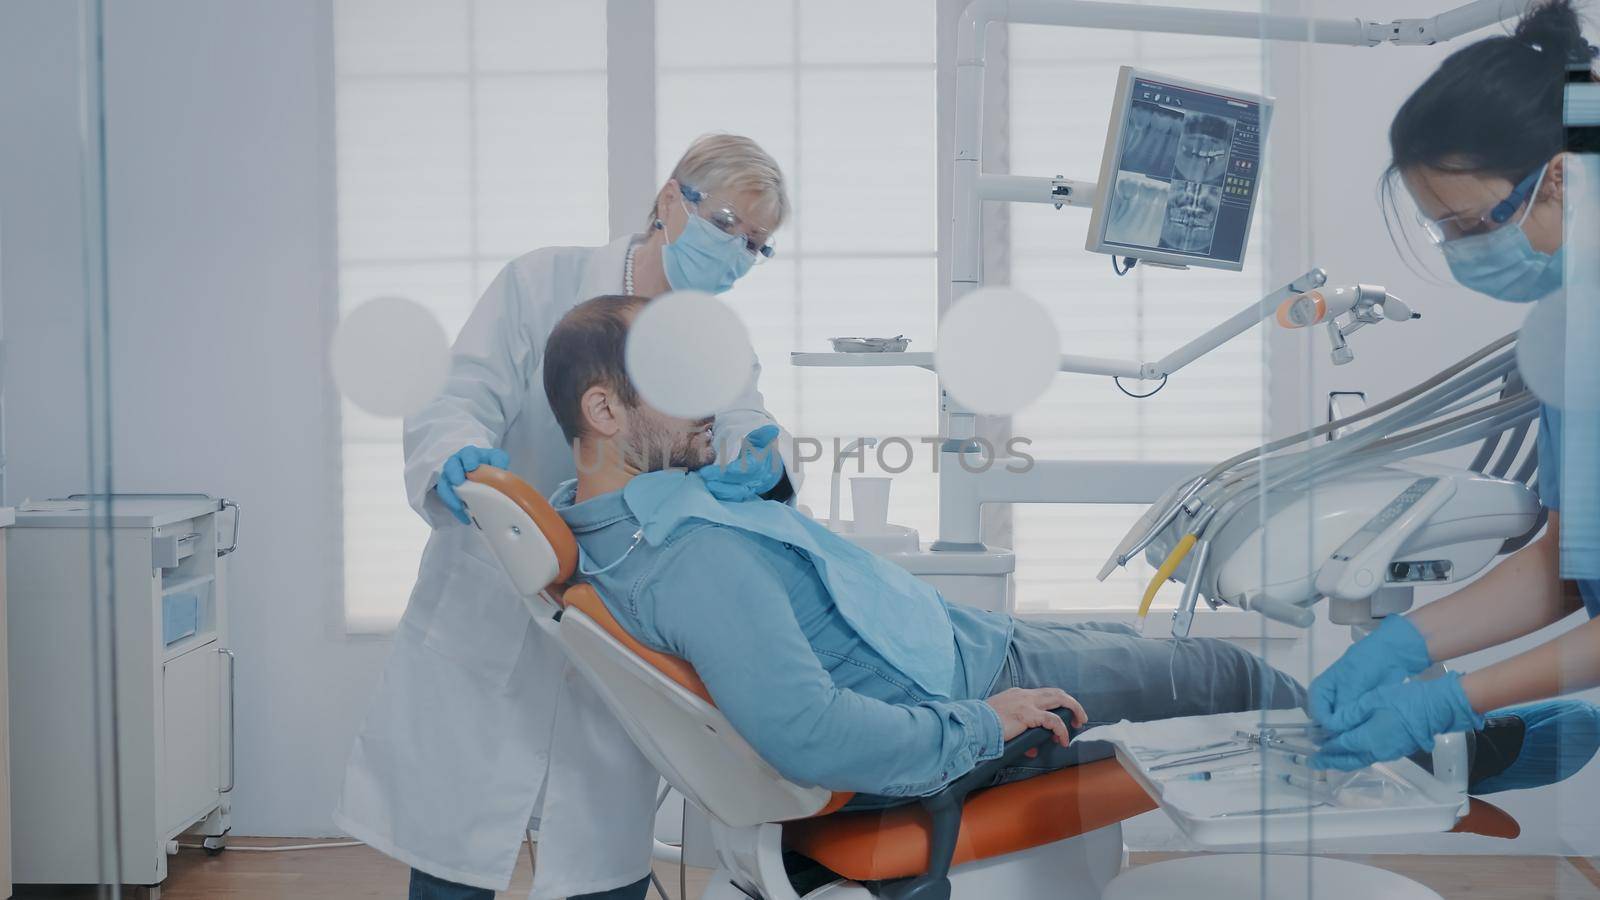 Stomatologist examining patient with mouth open in cabinet, using dental tools and equipment. Dentistry expert getting ready for surgical procedure to extract painful tooth for oral care.